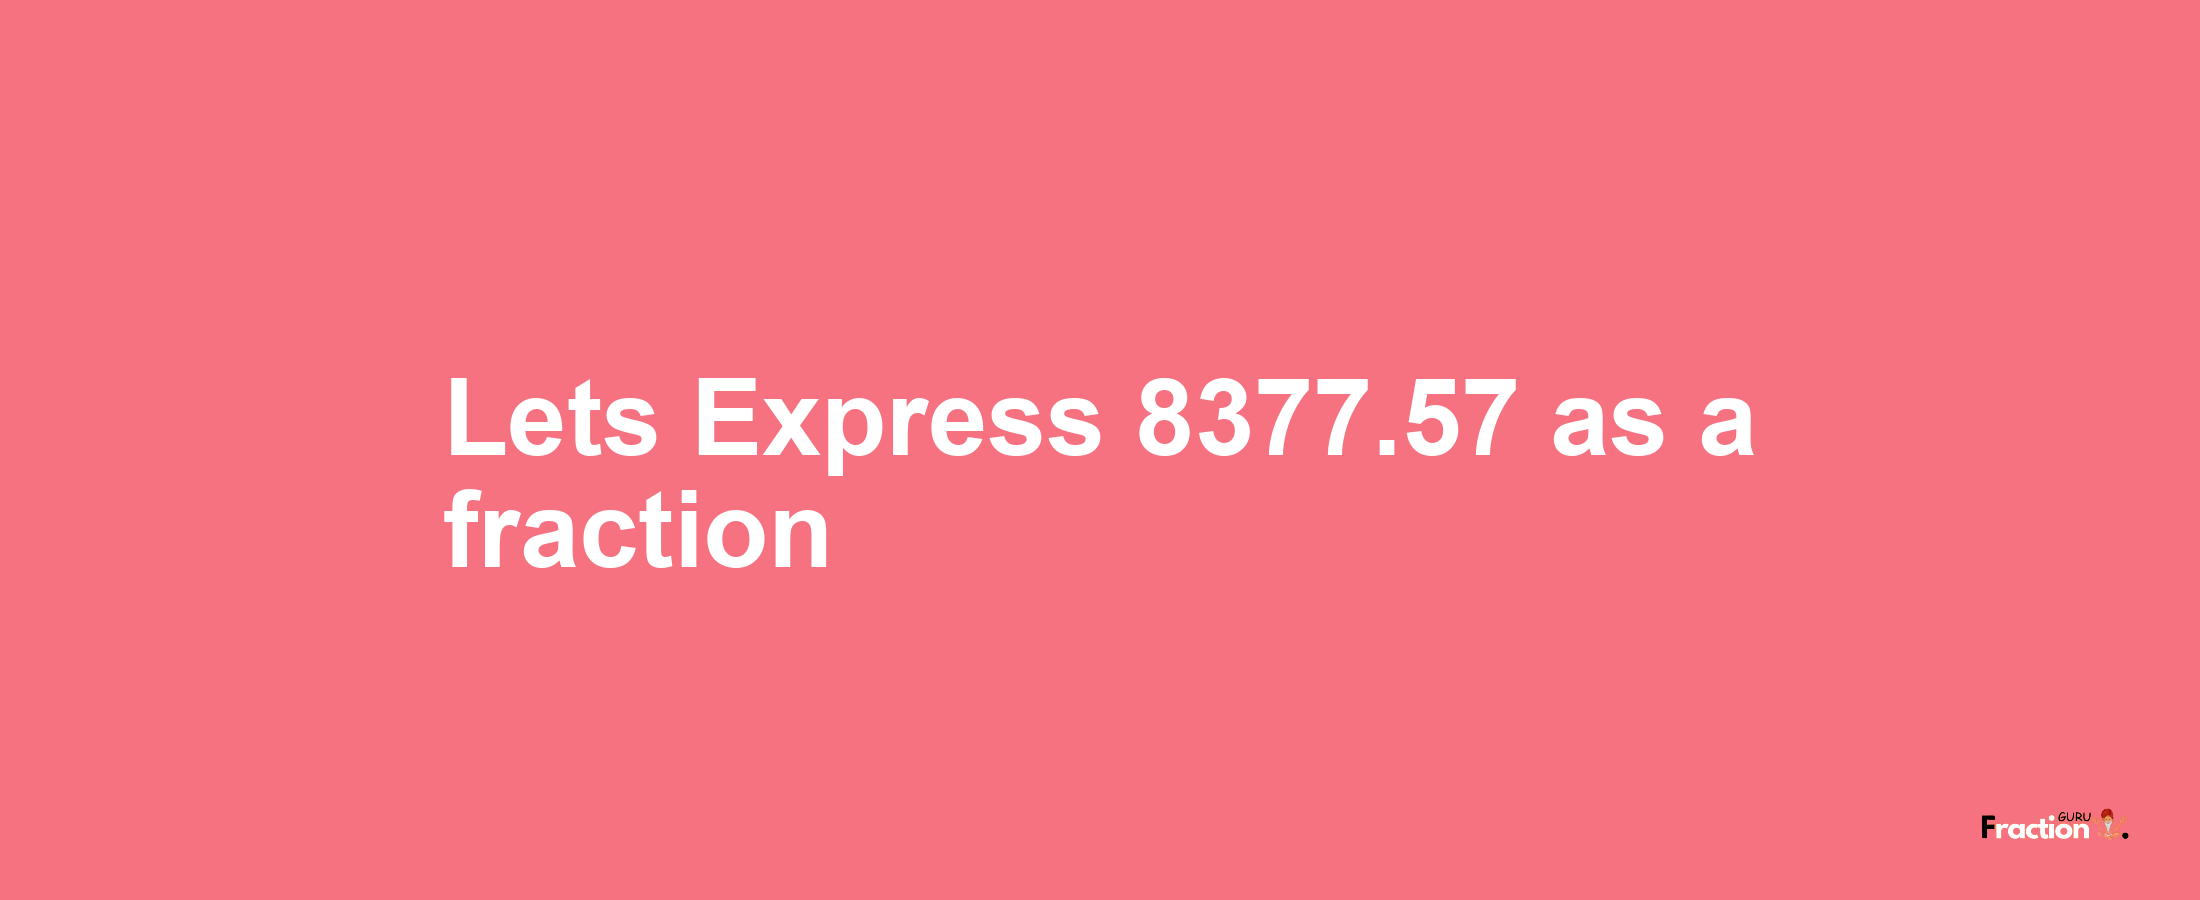 Lets Express 8377.57 as afraction